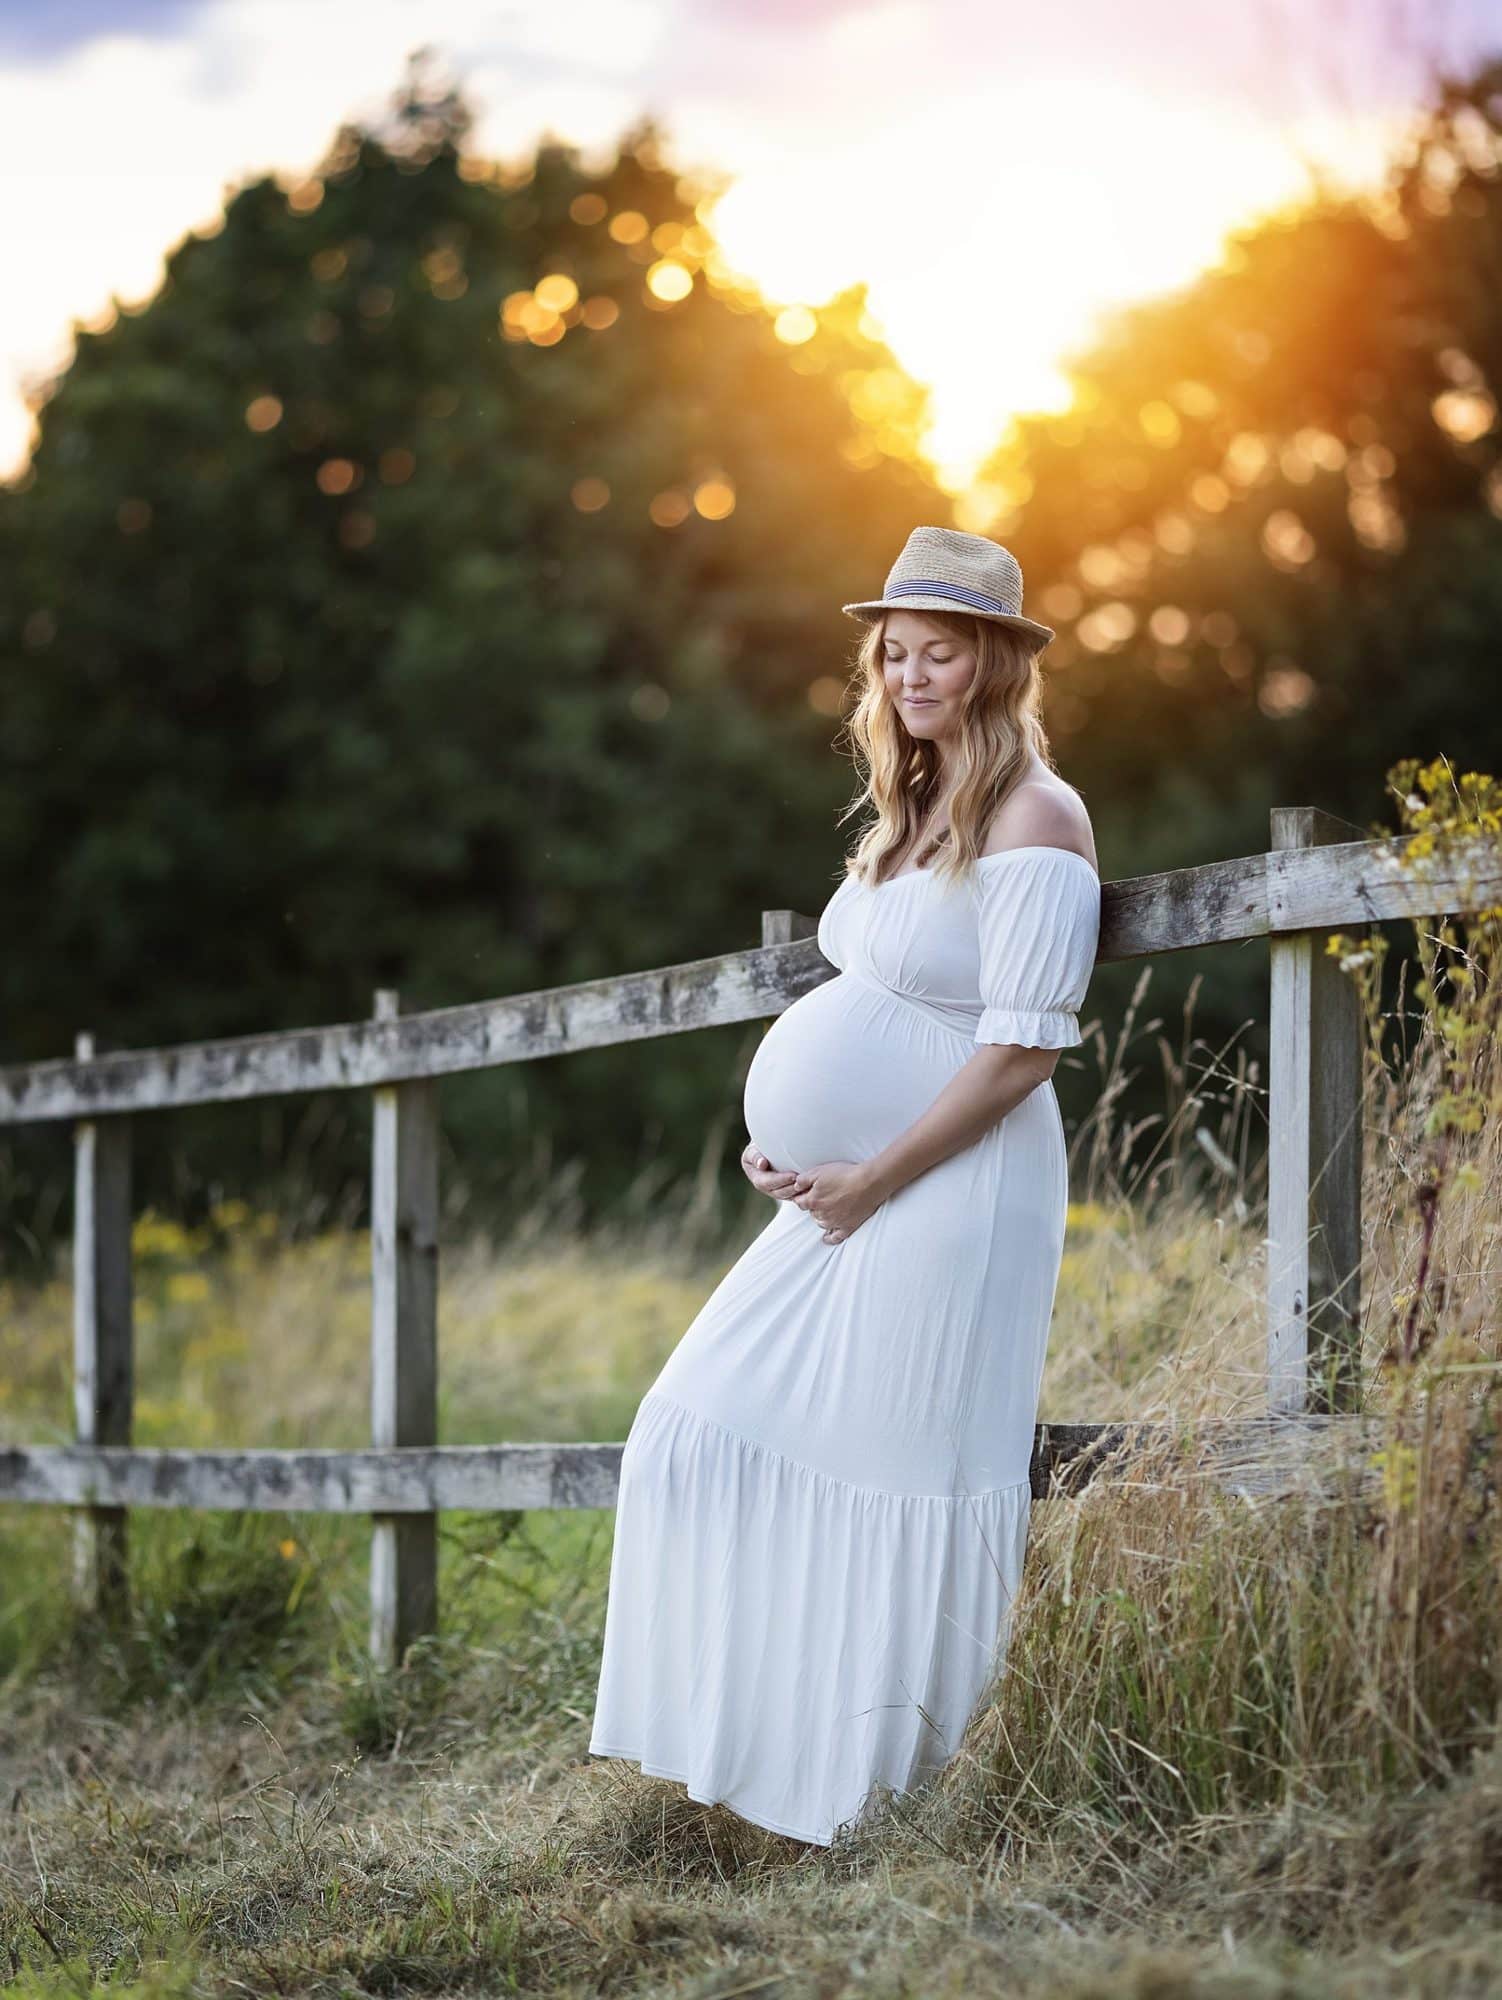 Pregnant woman leans on fence with sunset in background